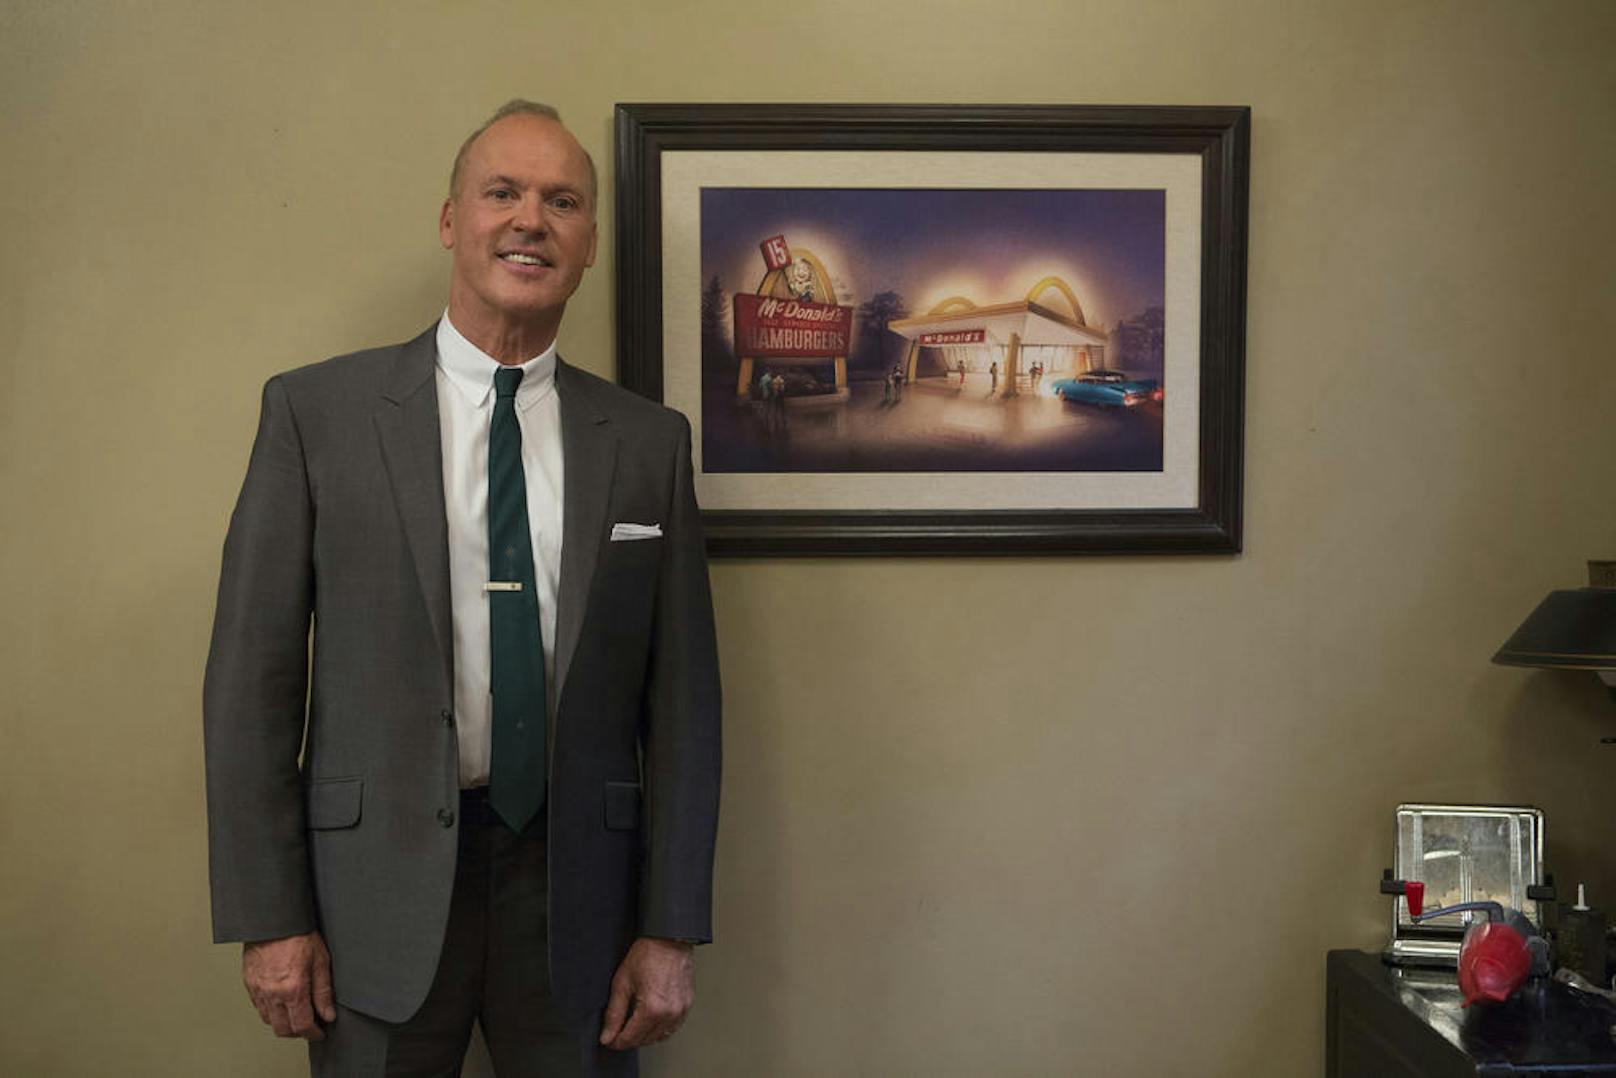 Michael Keaton in "The Founder"